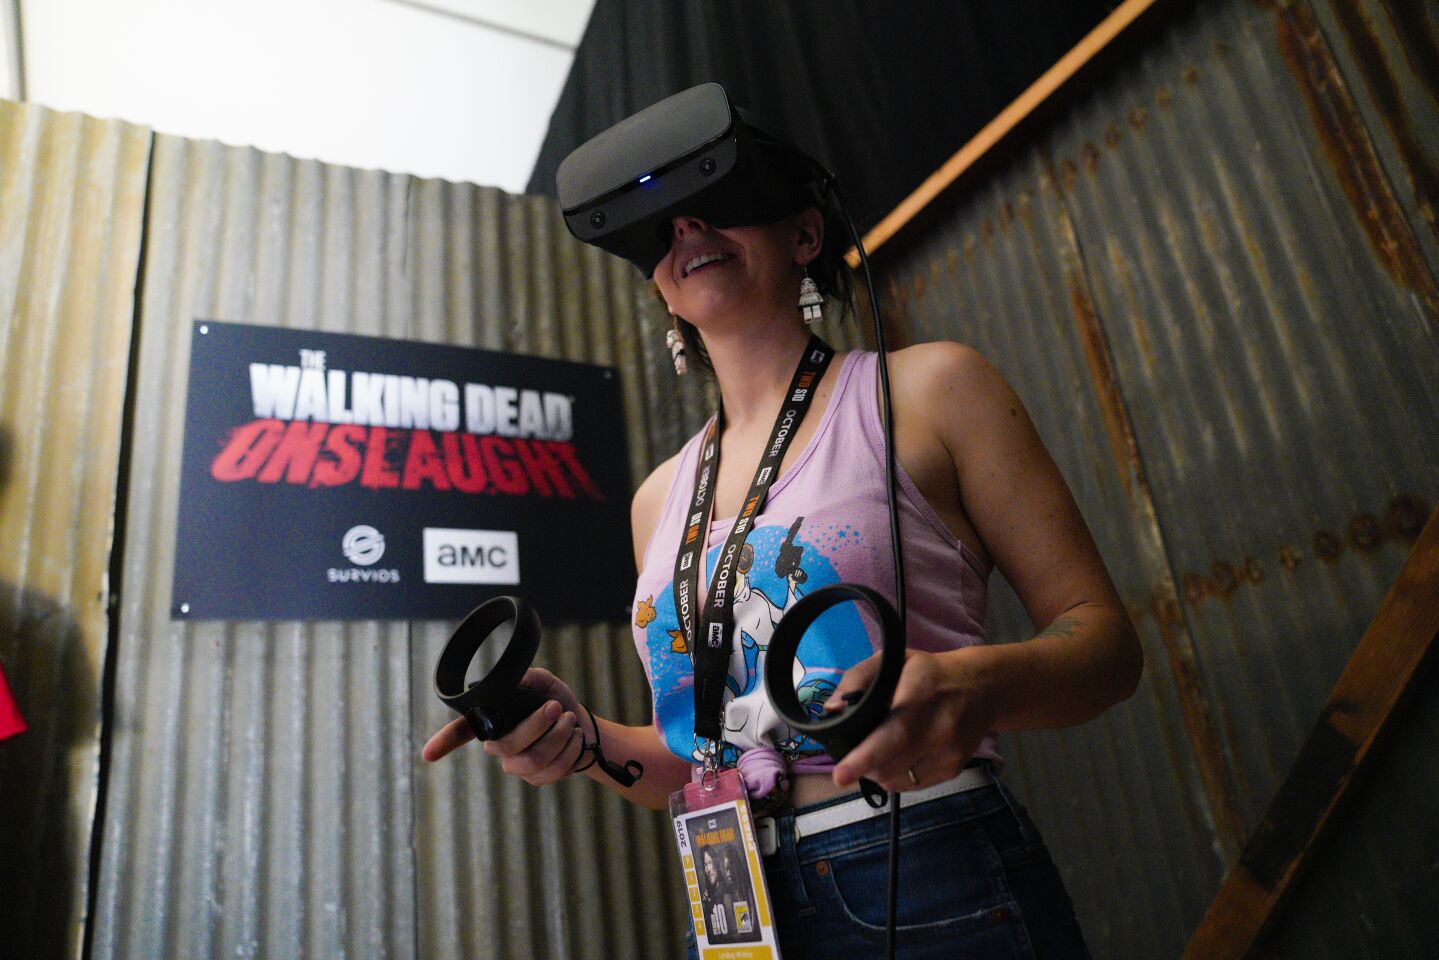 Lyndsay Winkley takes the new VR game for a test drive at "The Walking Dead" exhibit just outside the main convention center in downtown San Diego.